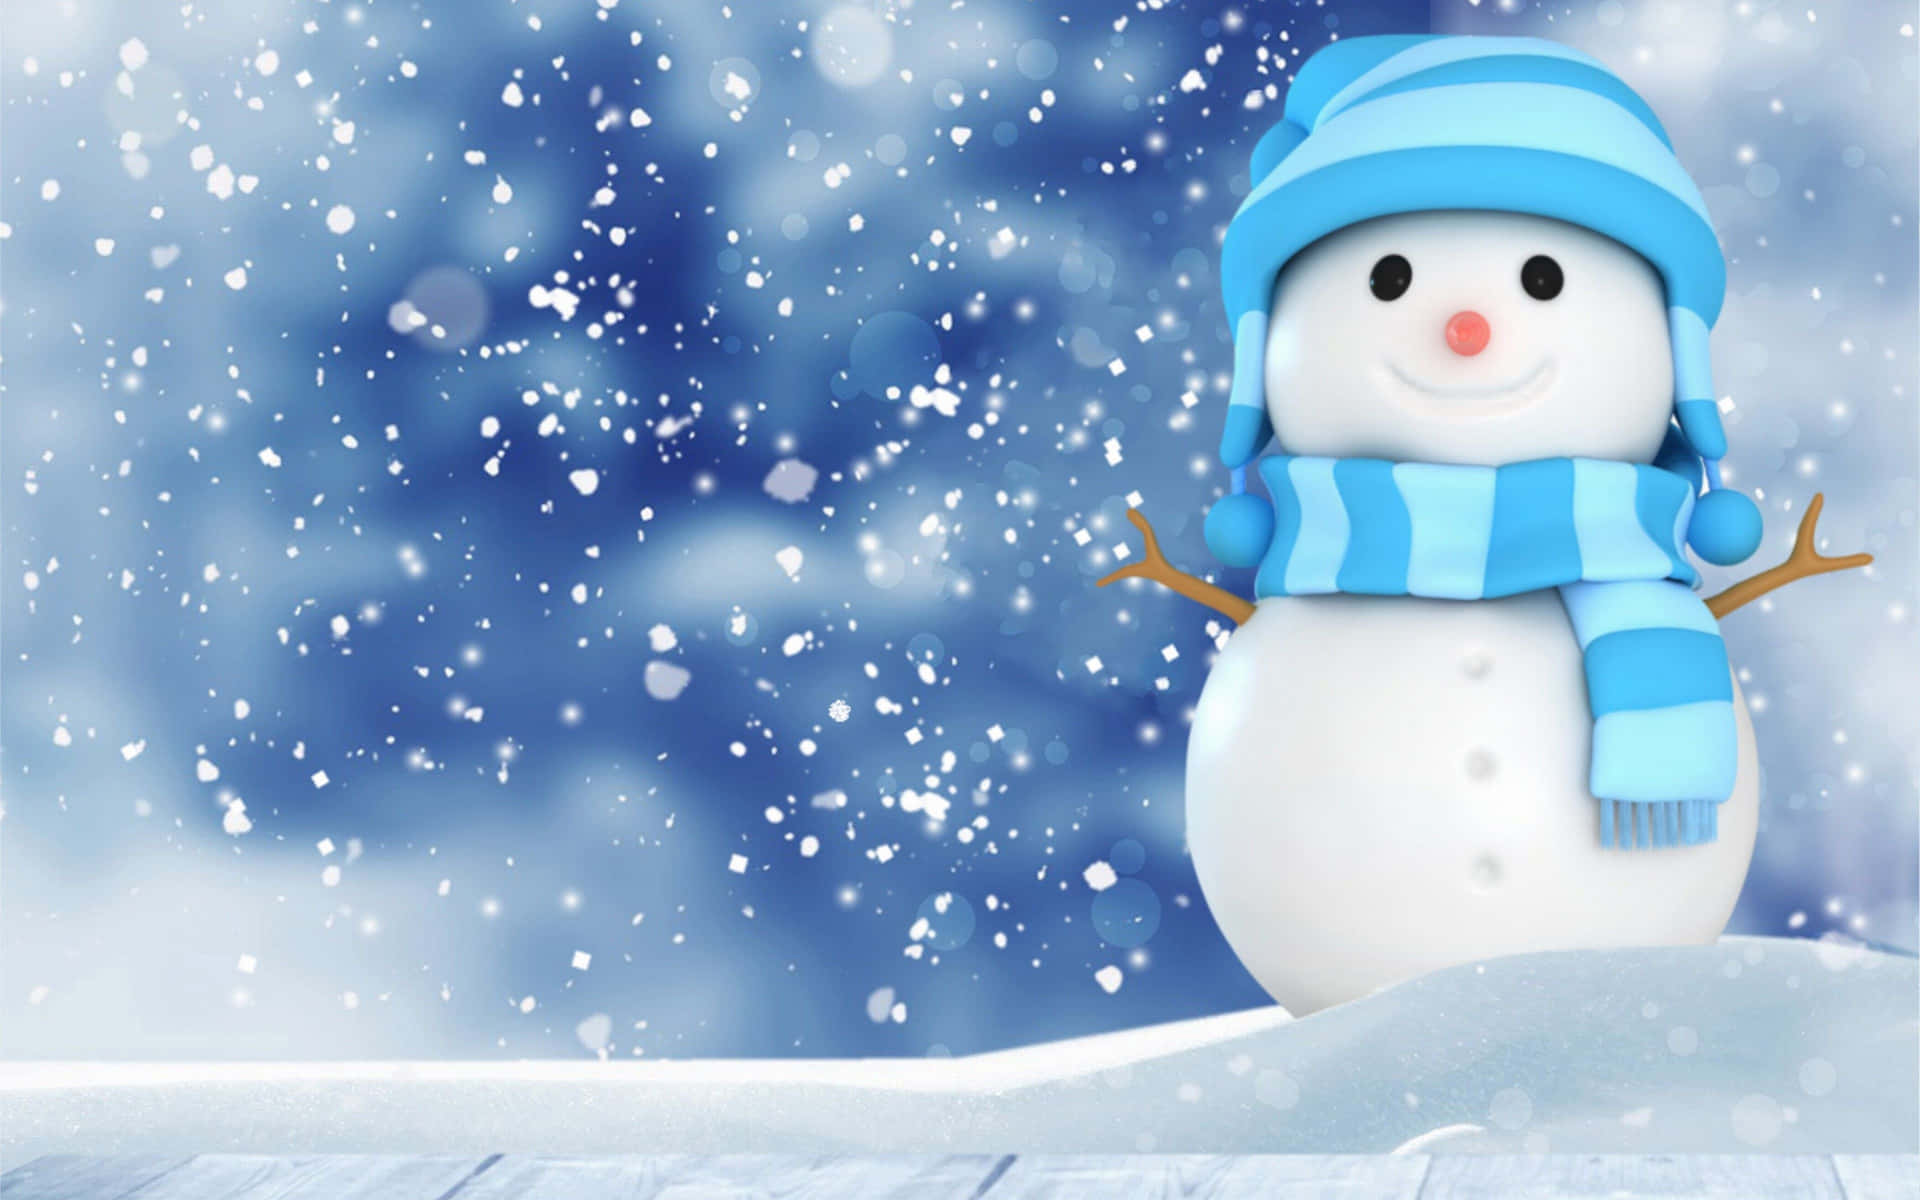 A snowman just waiting for a special kind of winter wonderland